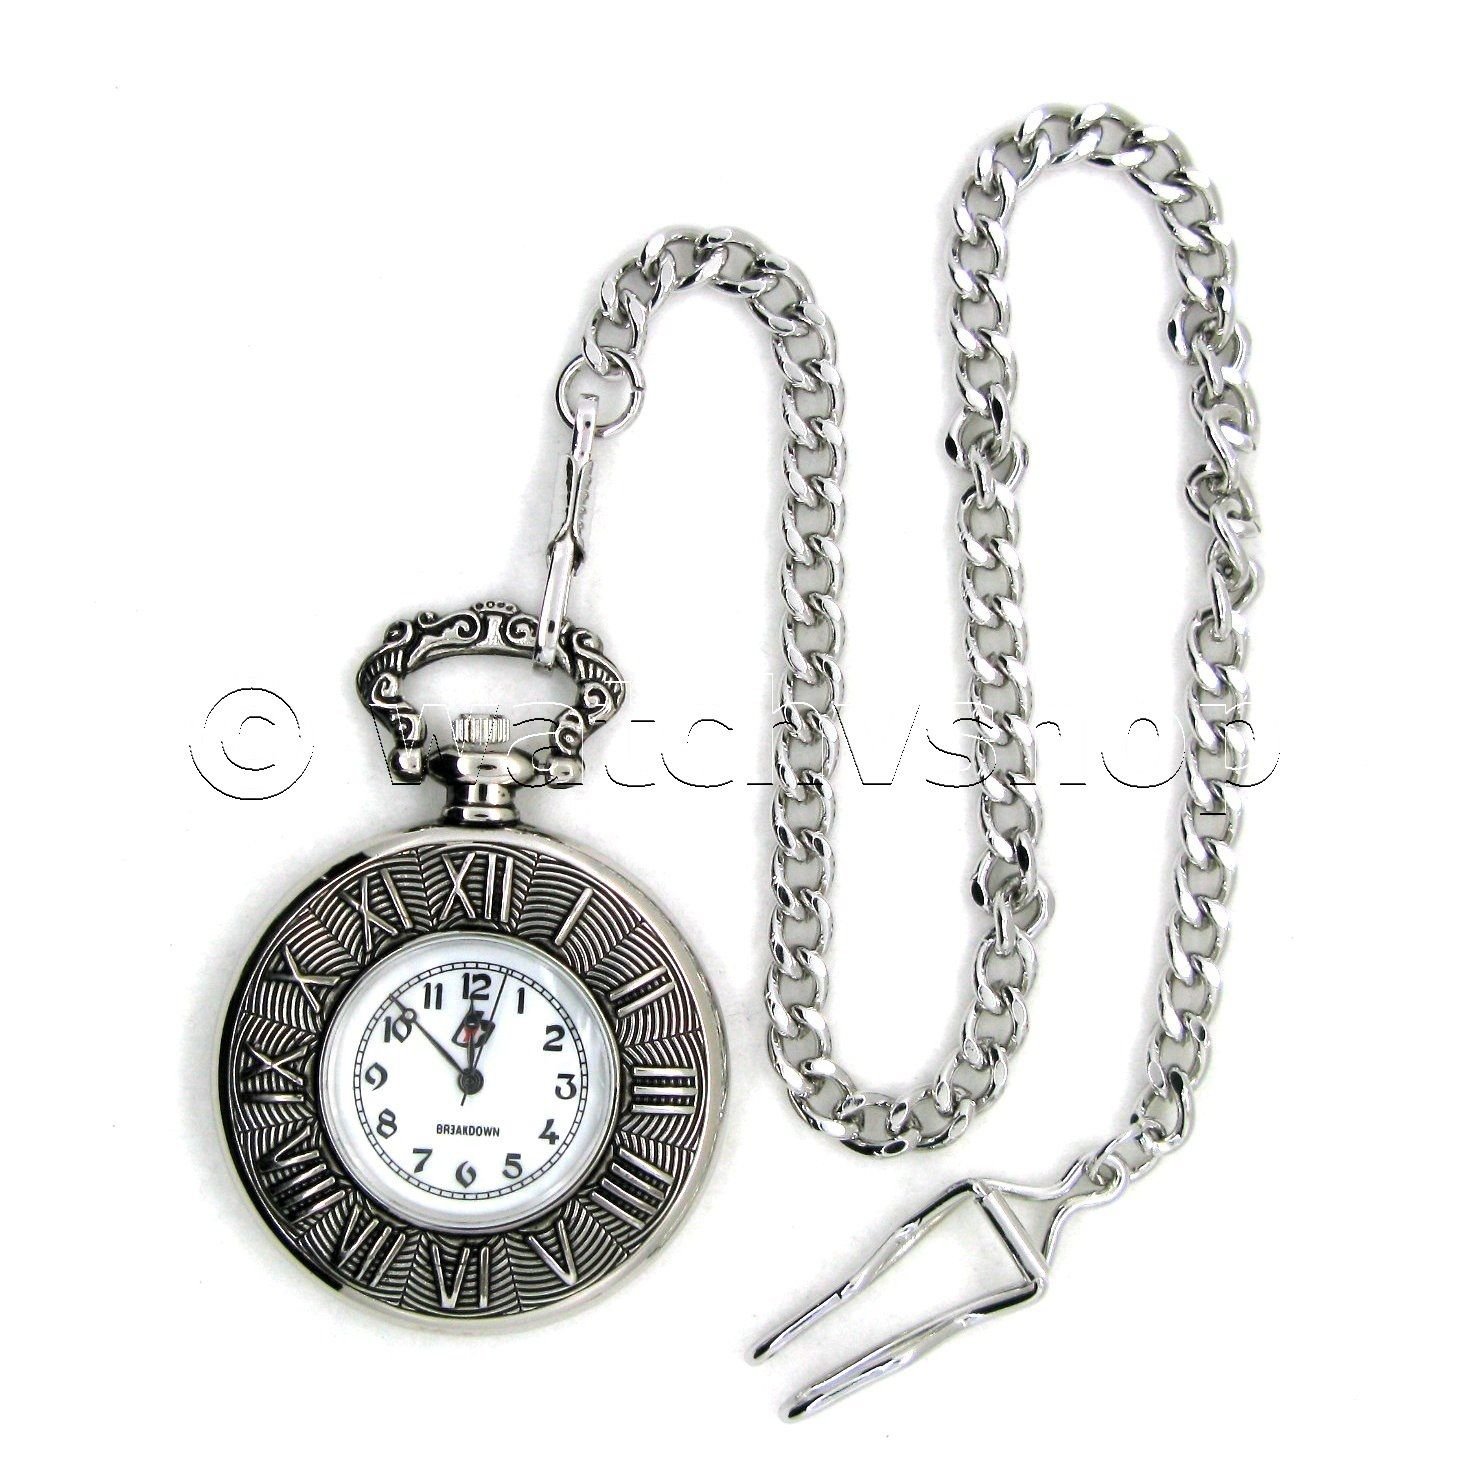 Silver Pocket Watch Open Face Antique with Fob Chain and Gift Box ...